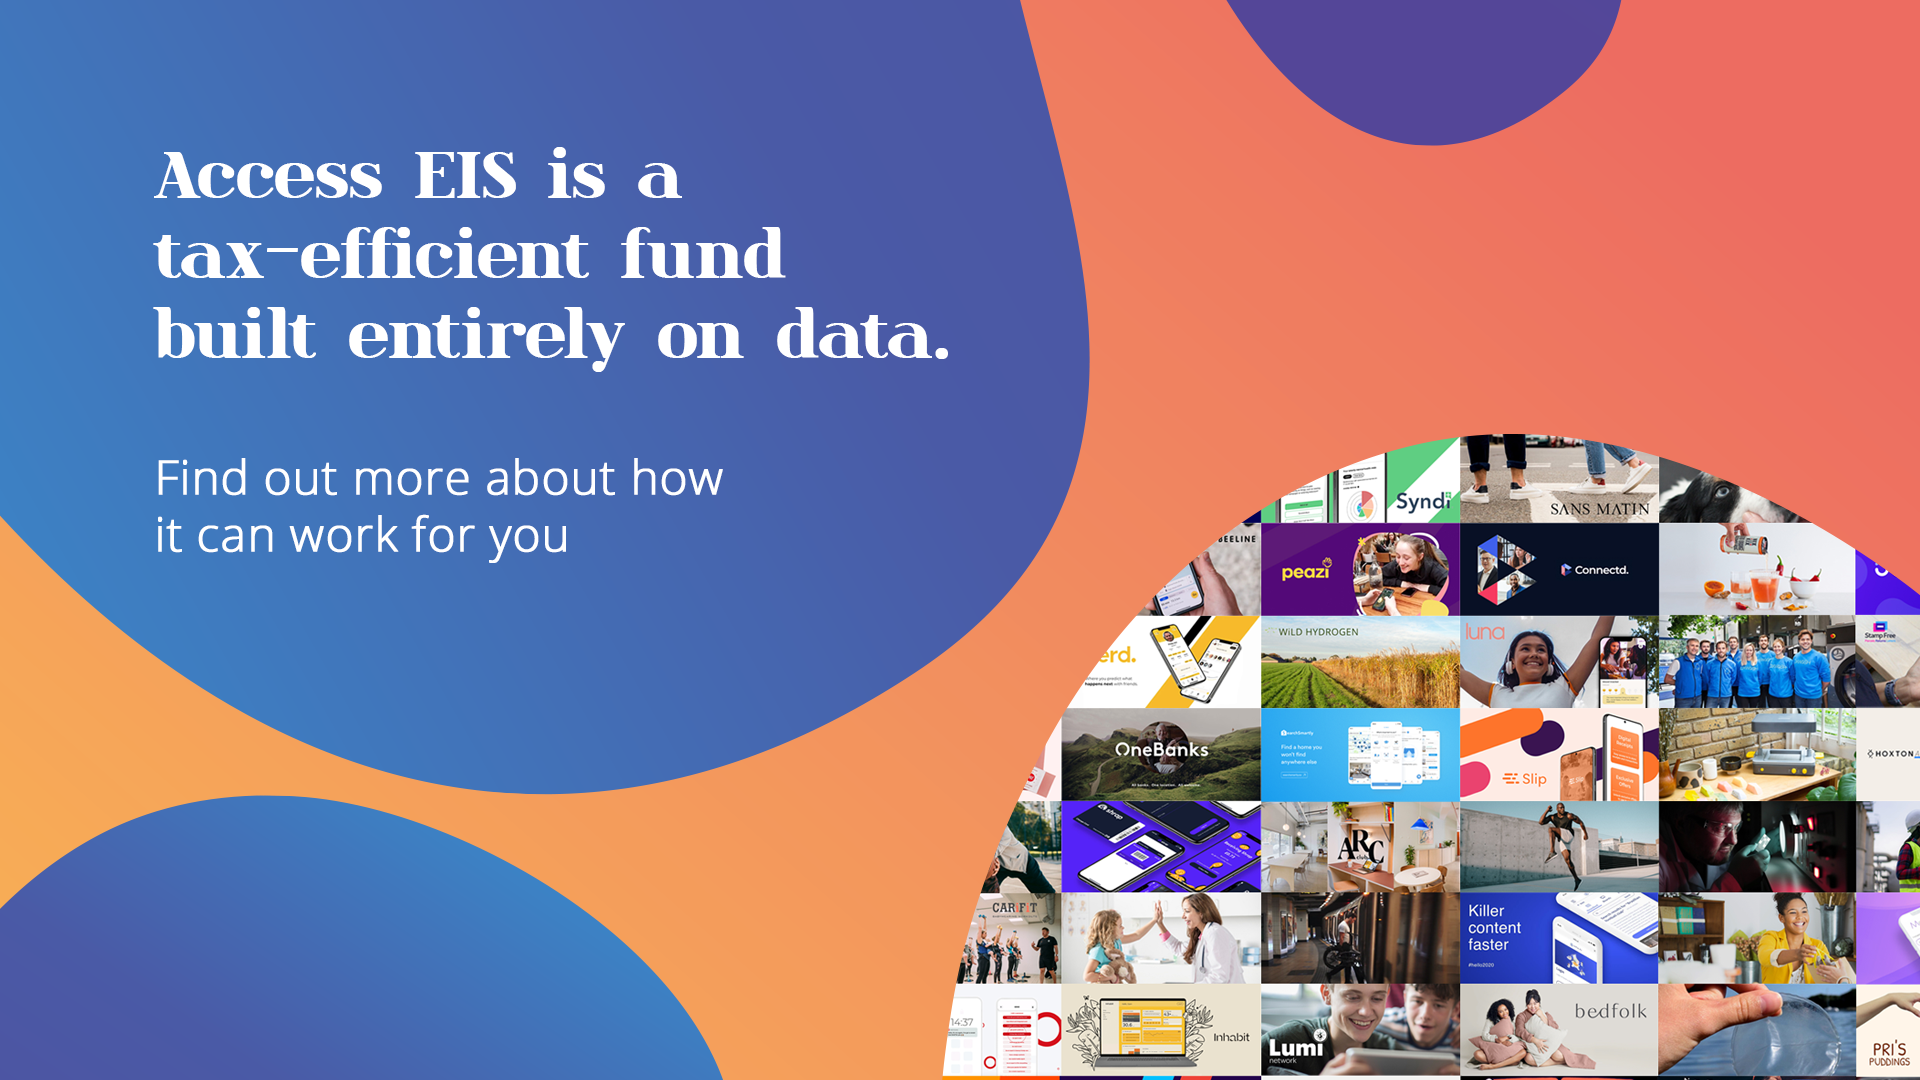 An advert for the Access EIS Fund that reads: Access EIS is a tax-efficient fun built entirely on data. Find out more about how it can work for you.